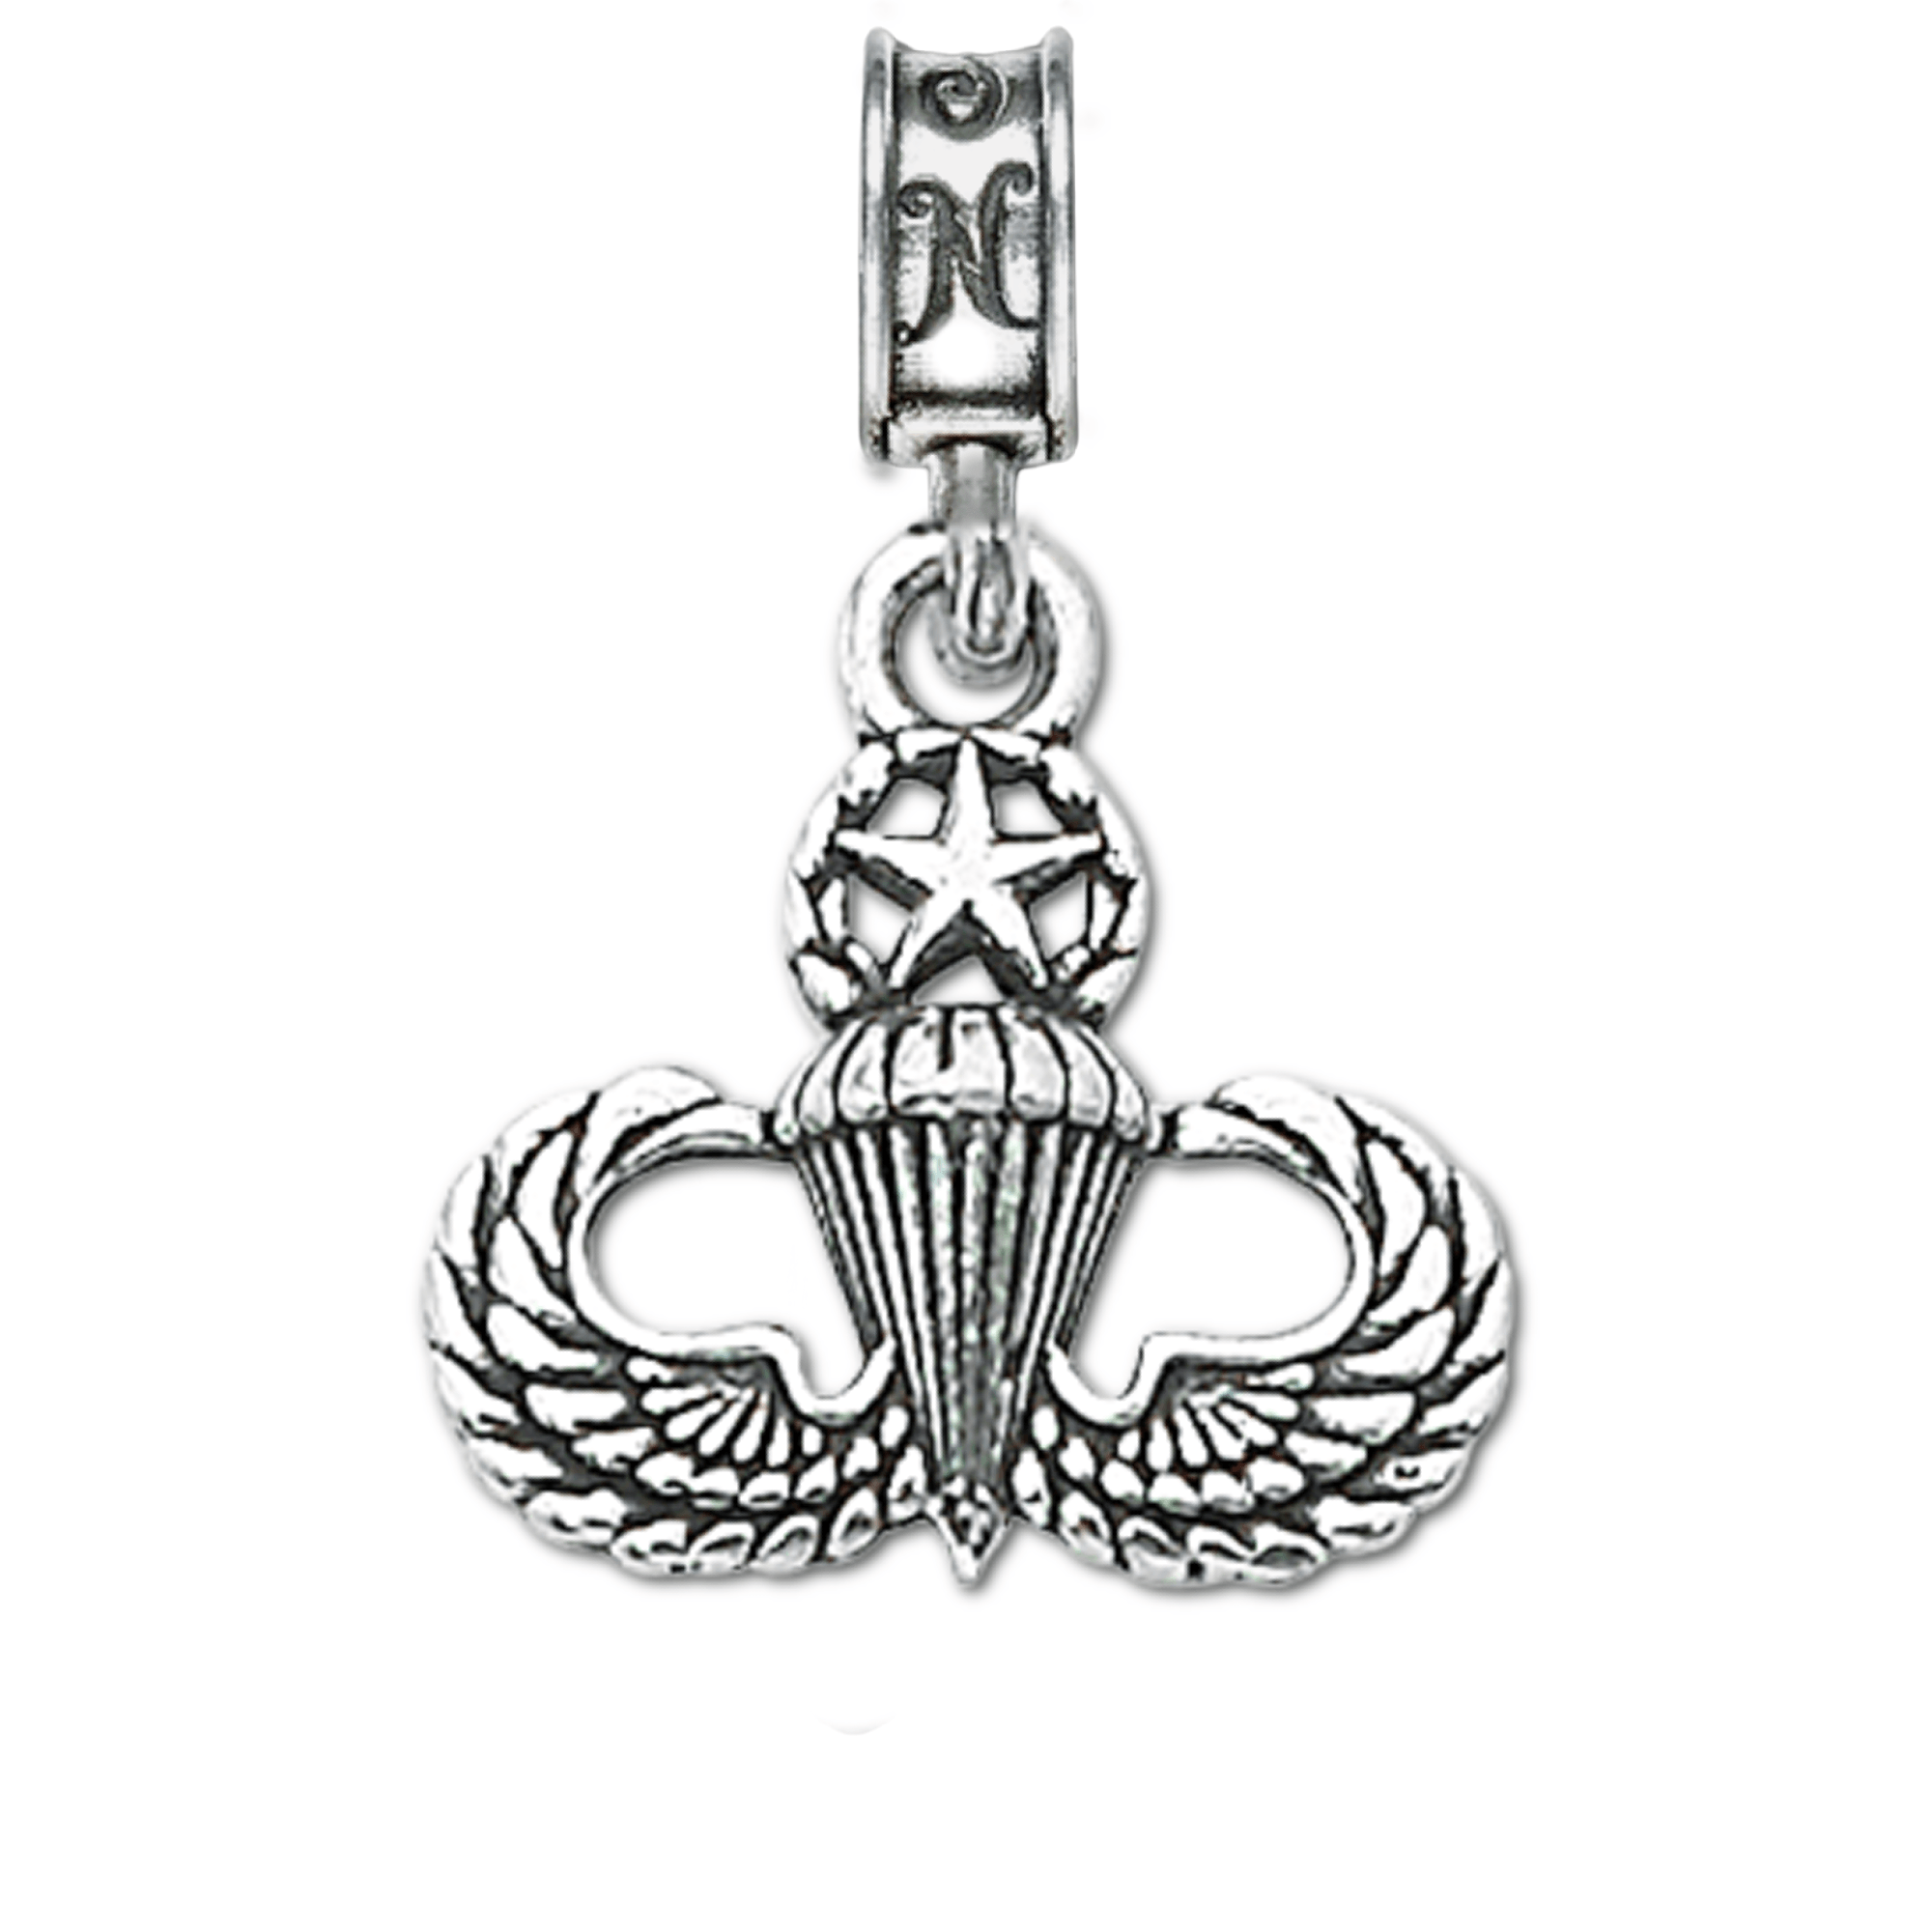 Military Jewelry, Military Charms, Military Gifts, Jump Wings Master Charm